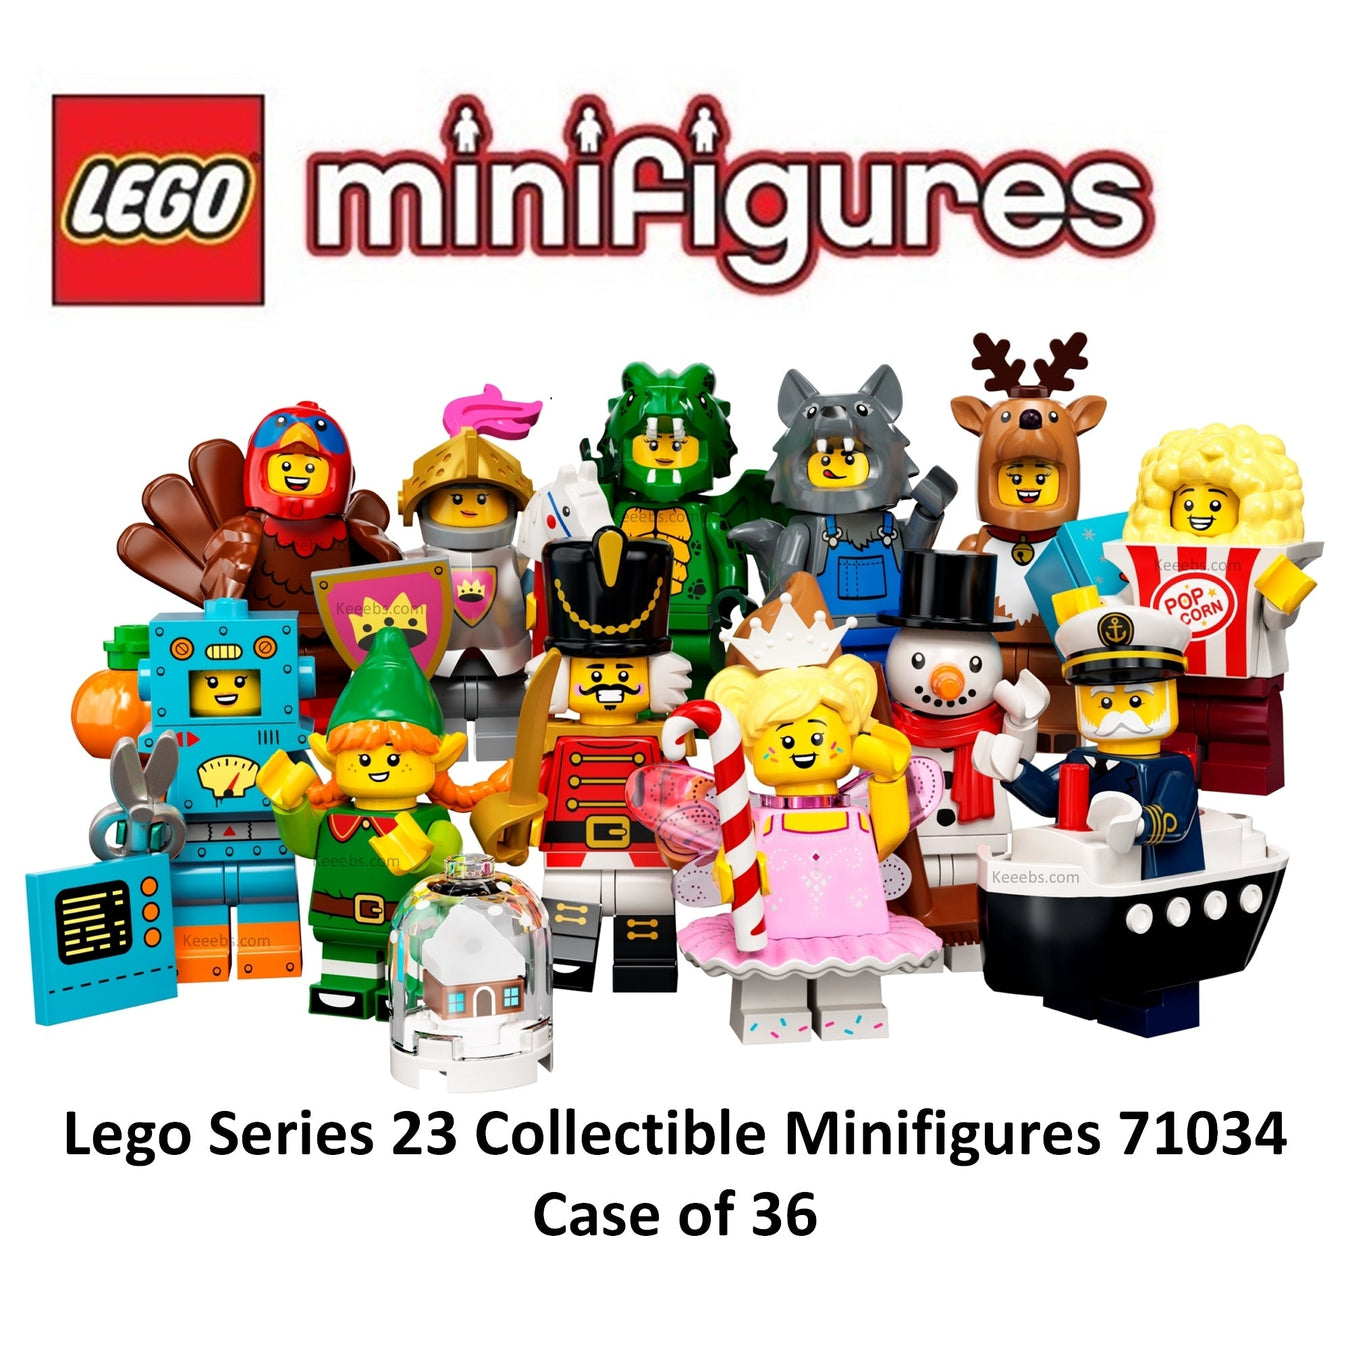 Lego - 71034 Series 23 Collectible Minifigures Factory Sealed Case 1